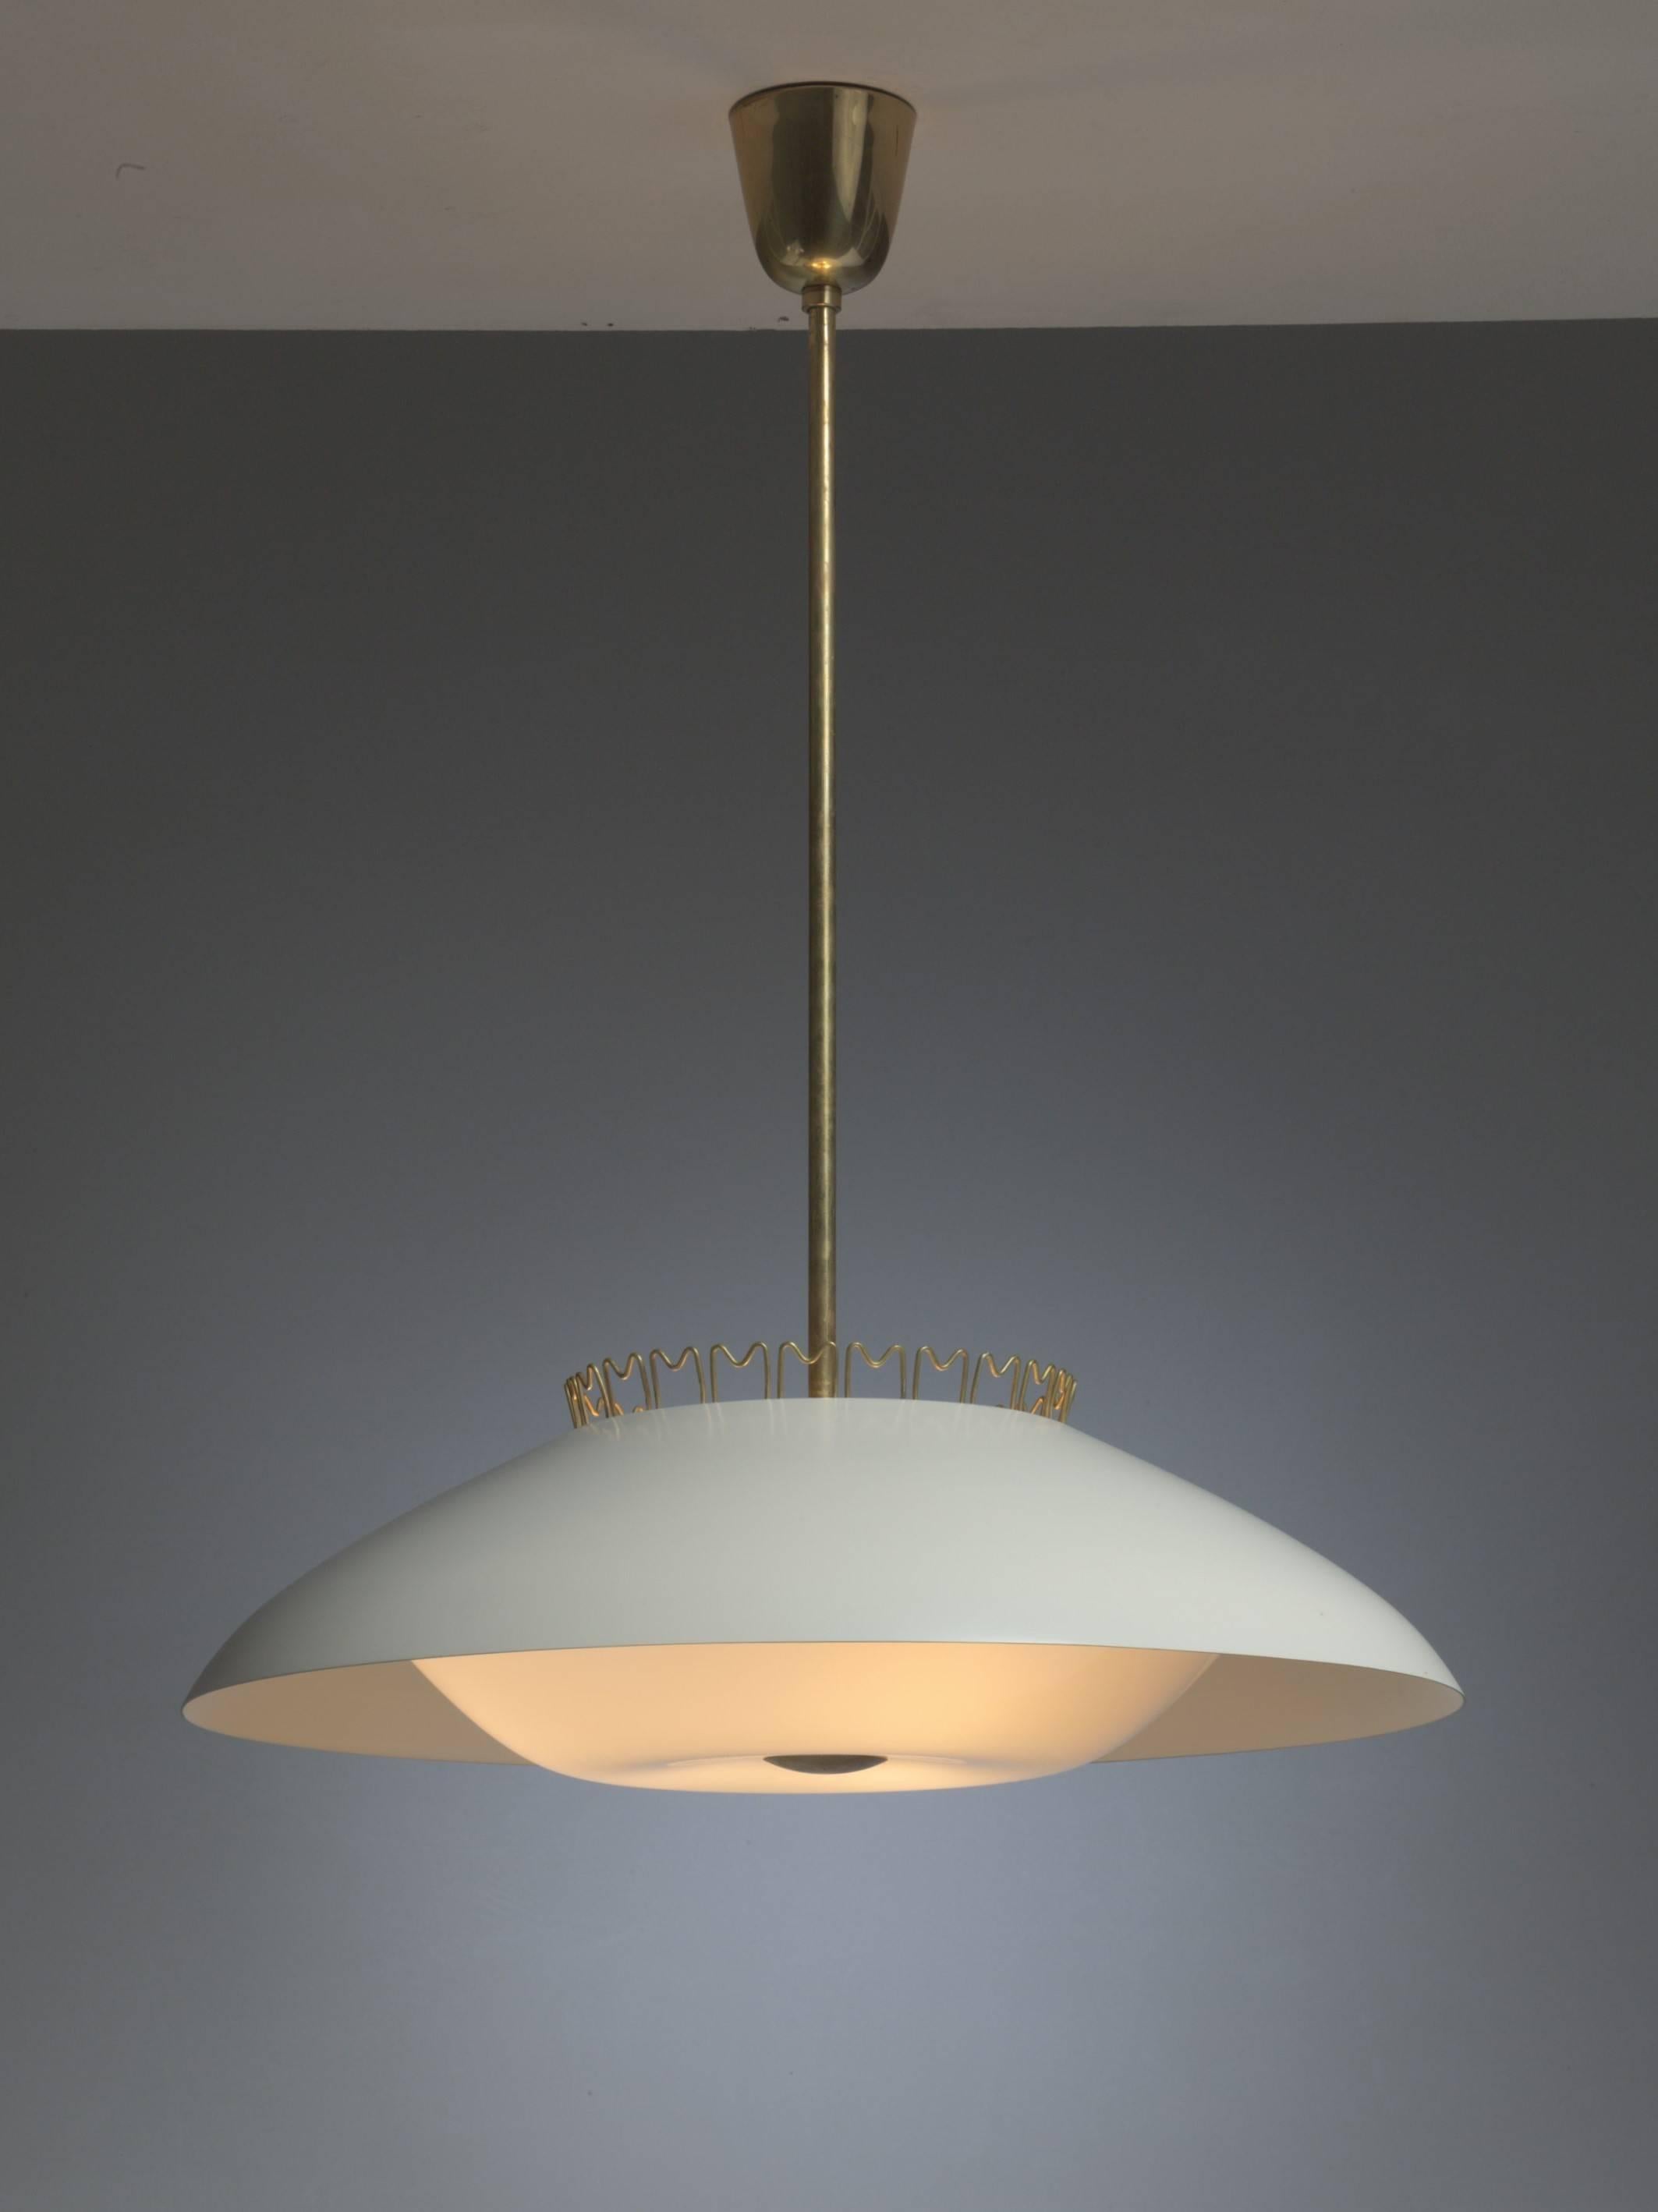 A rare model 1118 pendant lamp from the early 1950s by Lisa Johansson-Pape for Stockmann-Orno. This large (60 cm diameter) pendant is made of a cream lacquered metal shade, an opaline diffuser and a brass stem. The lamp is crowned with brass